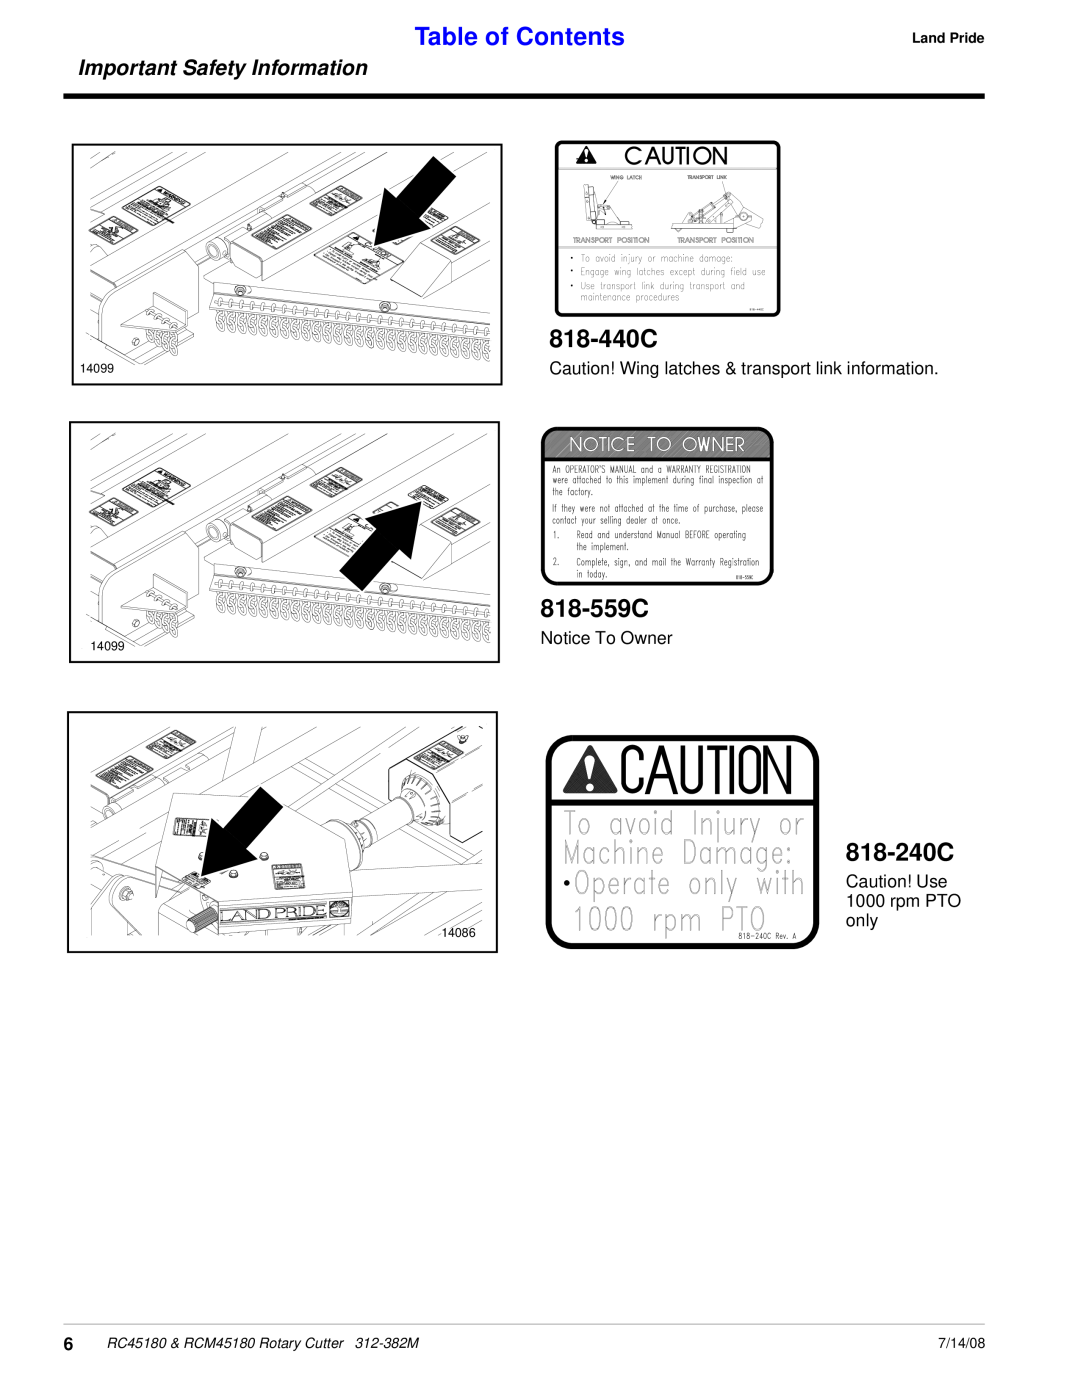 Land Pride RC45180 818-440C, Table of Contents, 818-240C, 818-559C, Important Safety Information, Land Pride, 7/14/08 